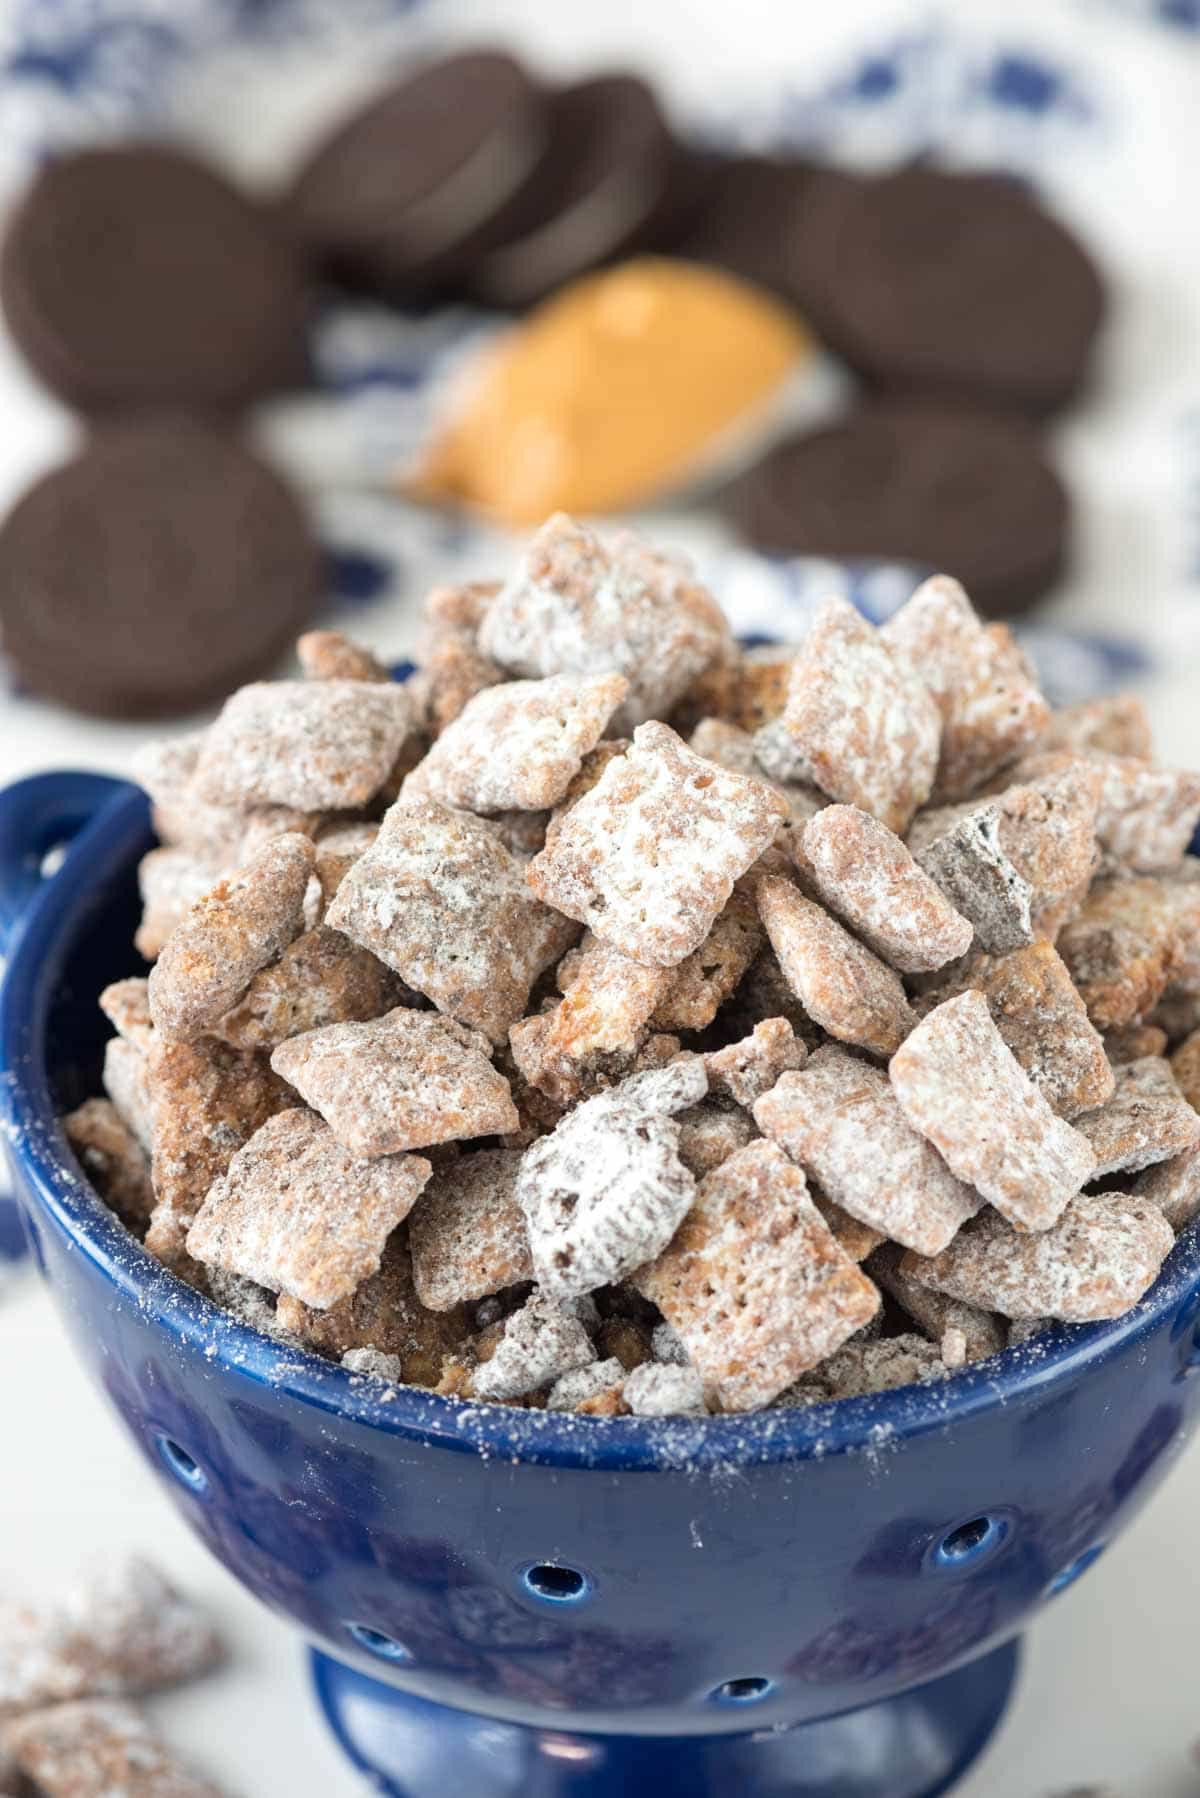 Peanut Butter Cookies 'n Cream Muddy Buddies - this easy puppy chow recipe adds crushed Oreos to the topping! Who knew you could improve on the muddy buddy recipe?